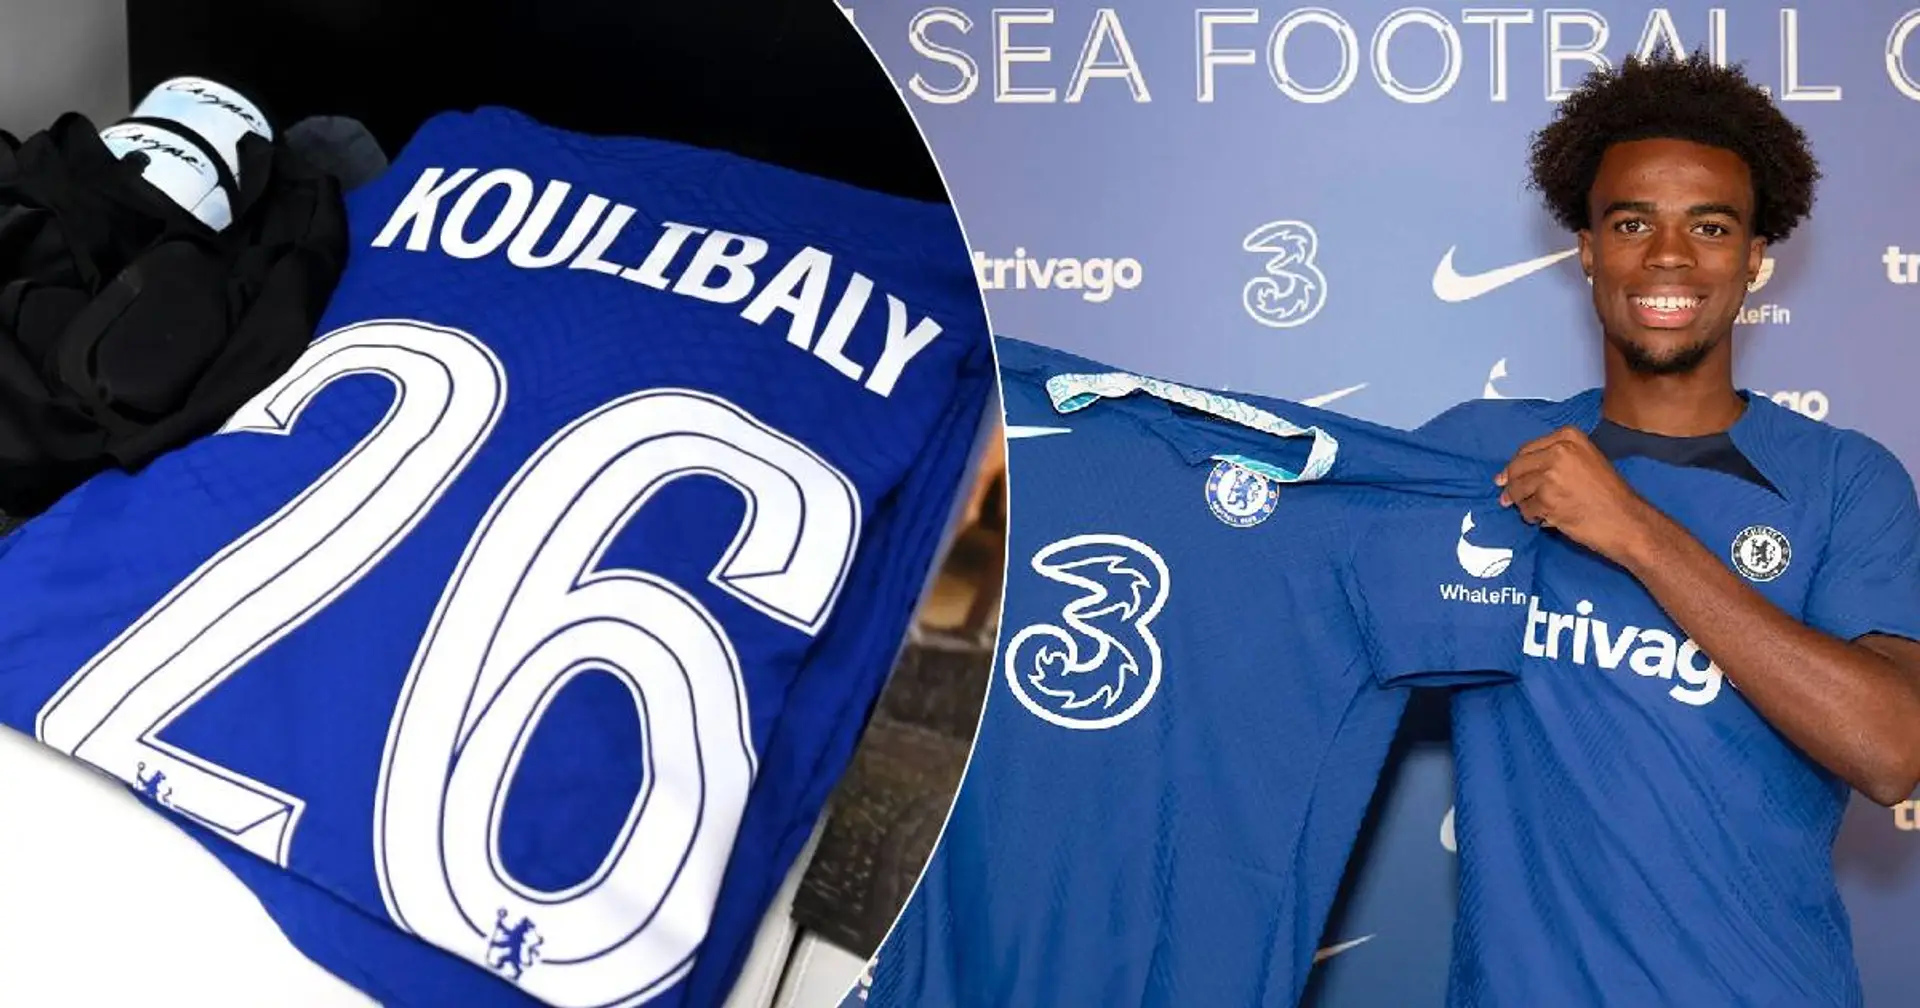 Chelsea's squad numbers for next season confirmed, Chukwuemeka gets David Luiz's old number